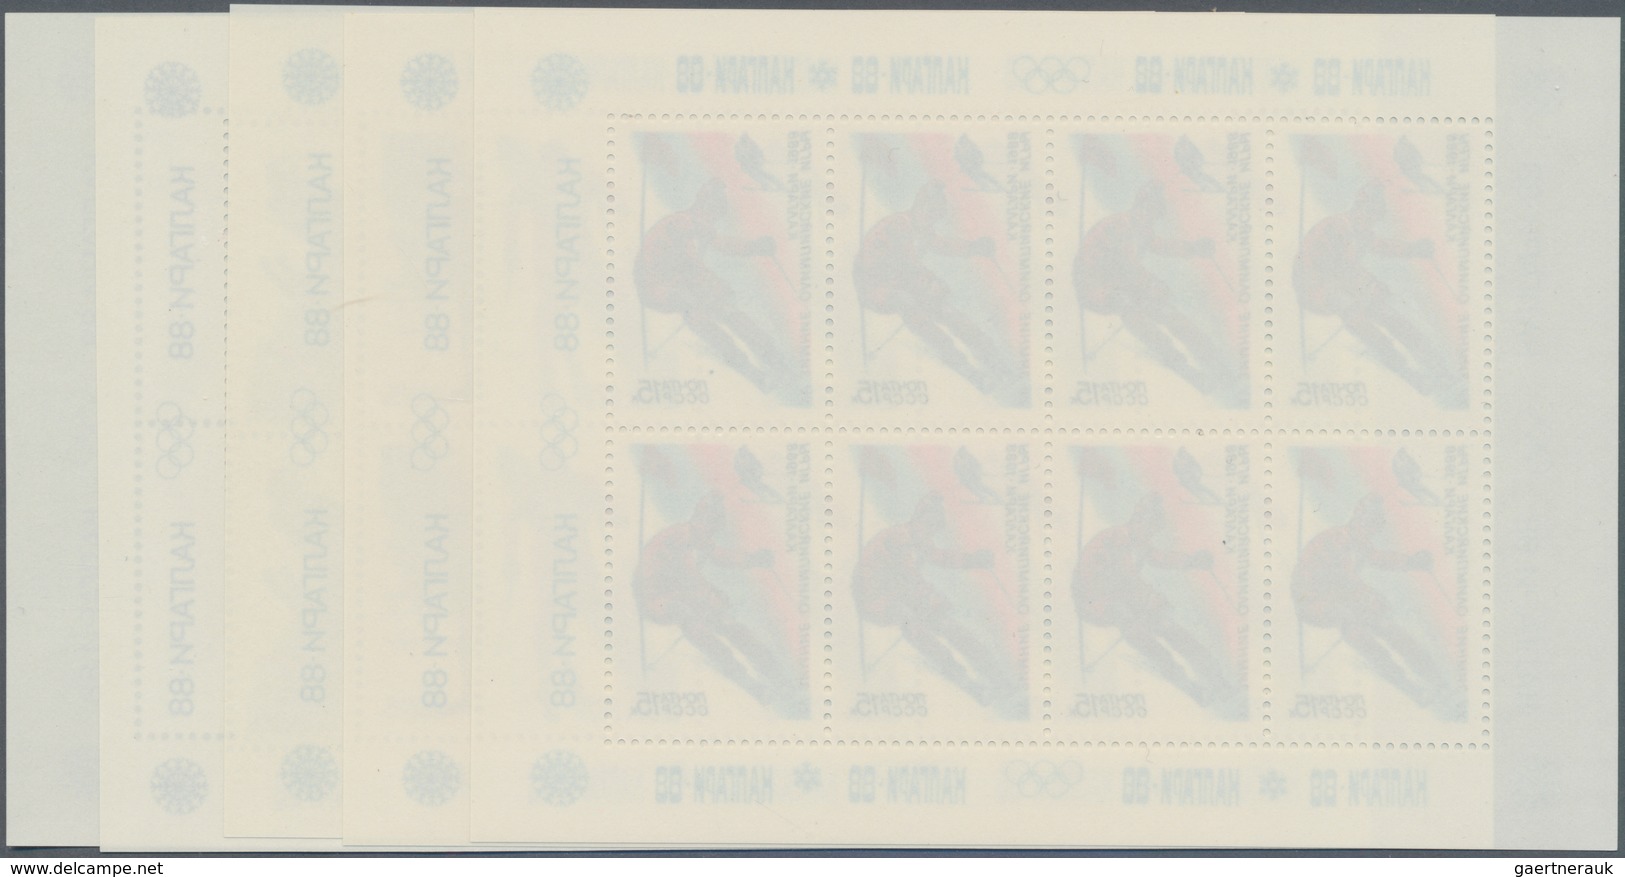 Sowjetunion: 1988, Olympic Games Calgary, Complete Set Of Five Mini Sheets, Mint Never Hinged. Mi. 5 - Briefe U. Dokumente